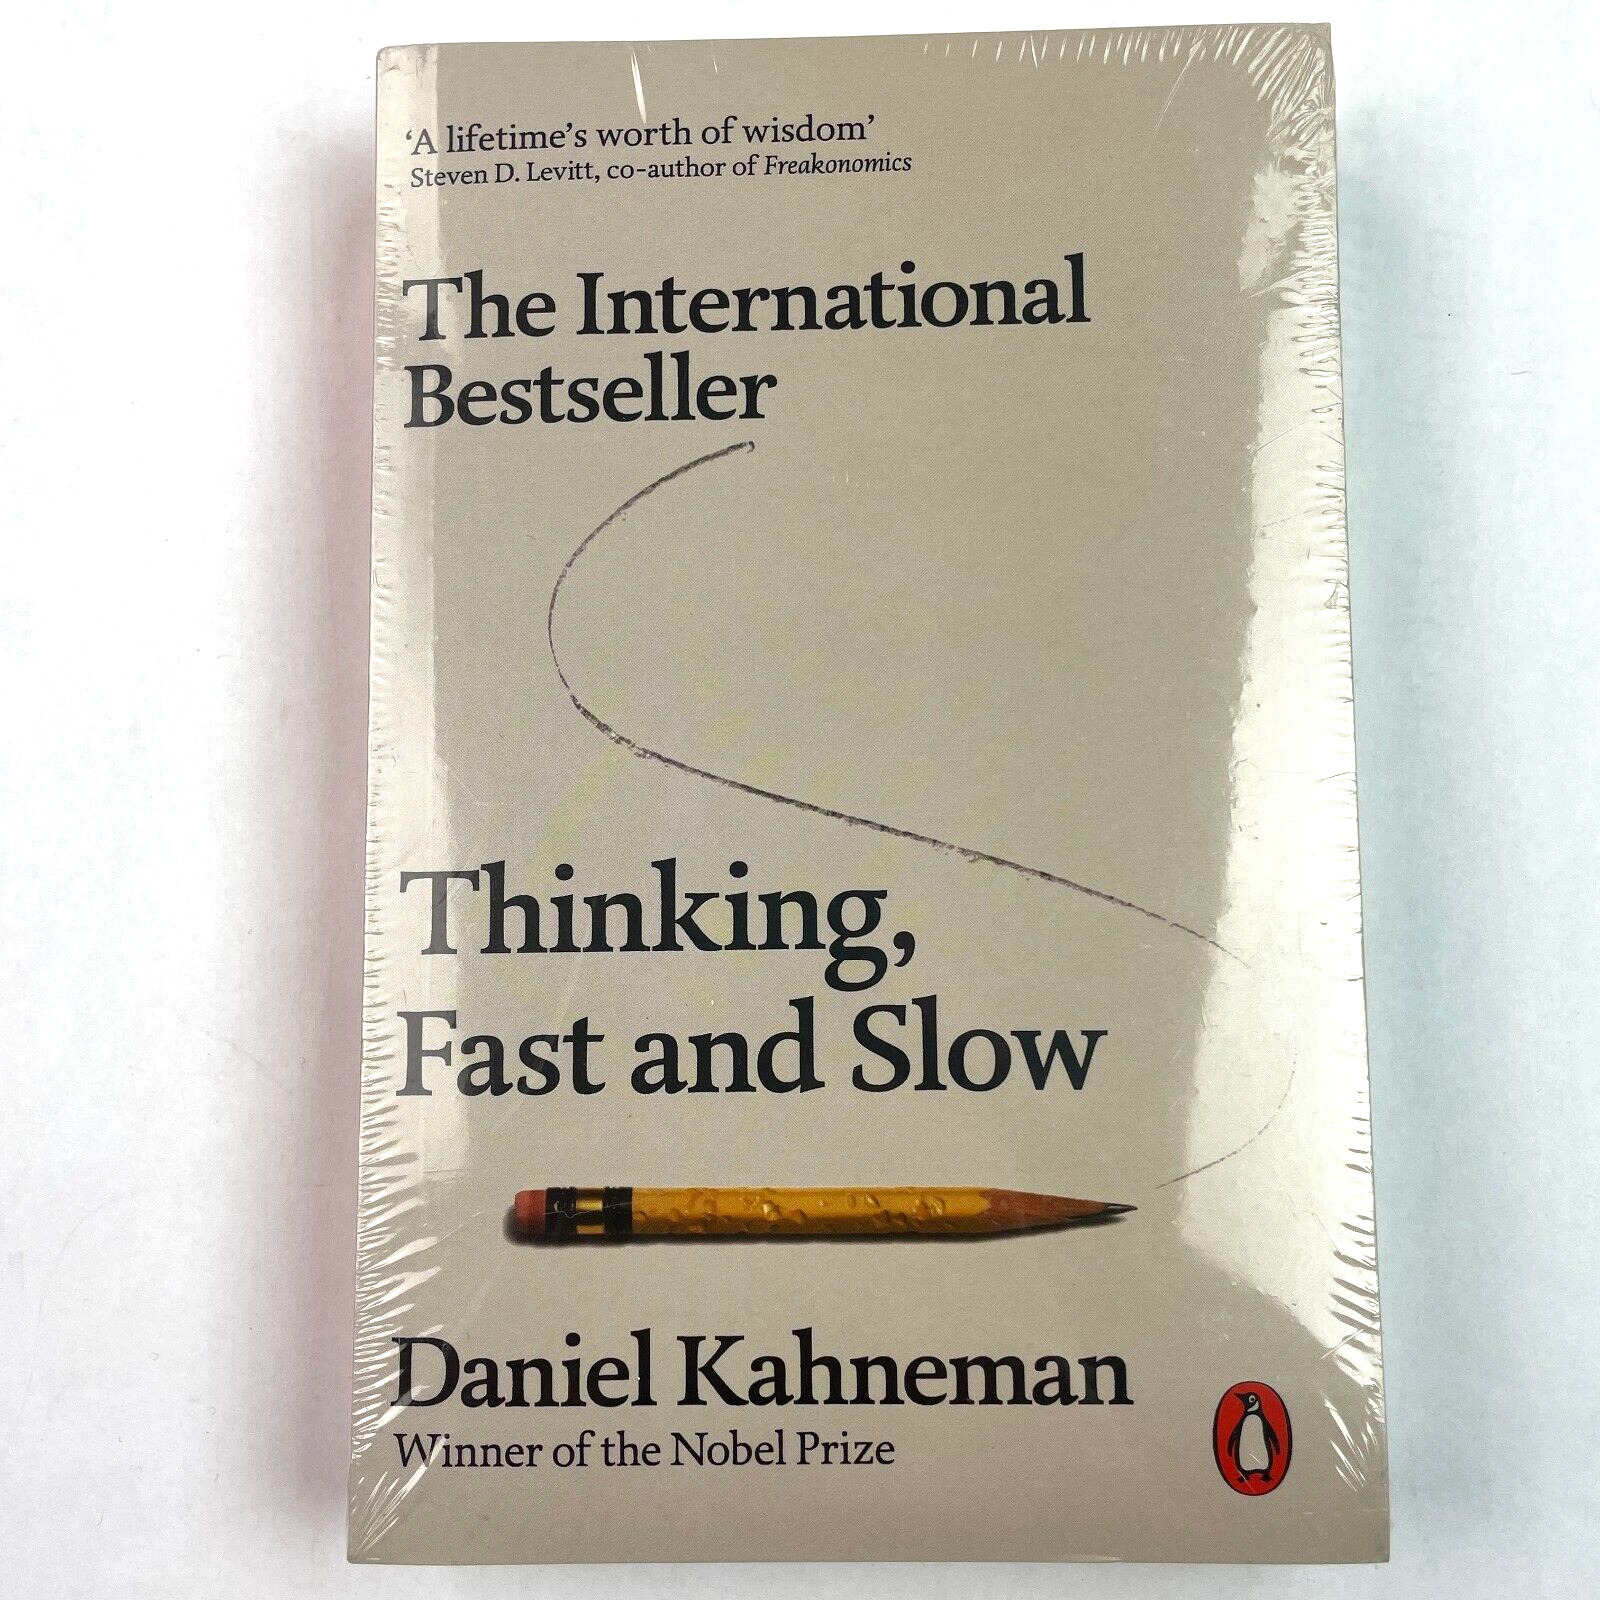 Thinking, Fast and Slow by Daniel Kahneman (Paperback) Book *NEW SEALED*